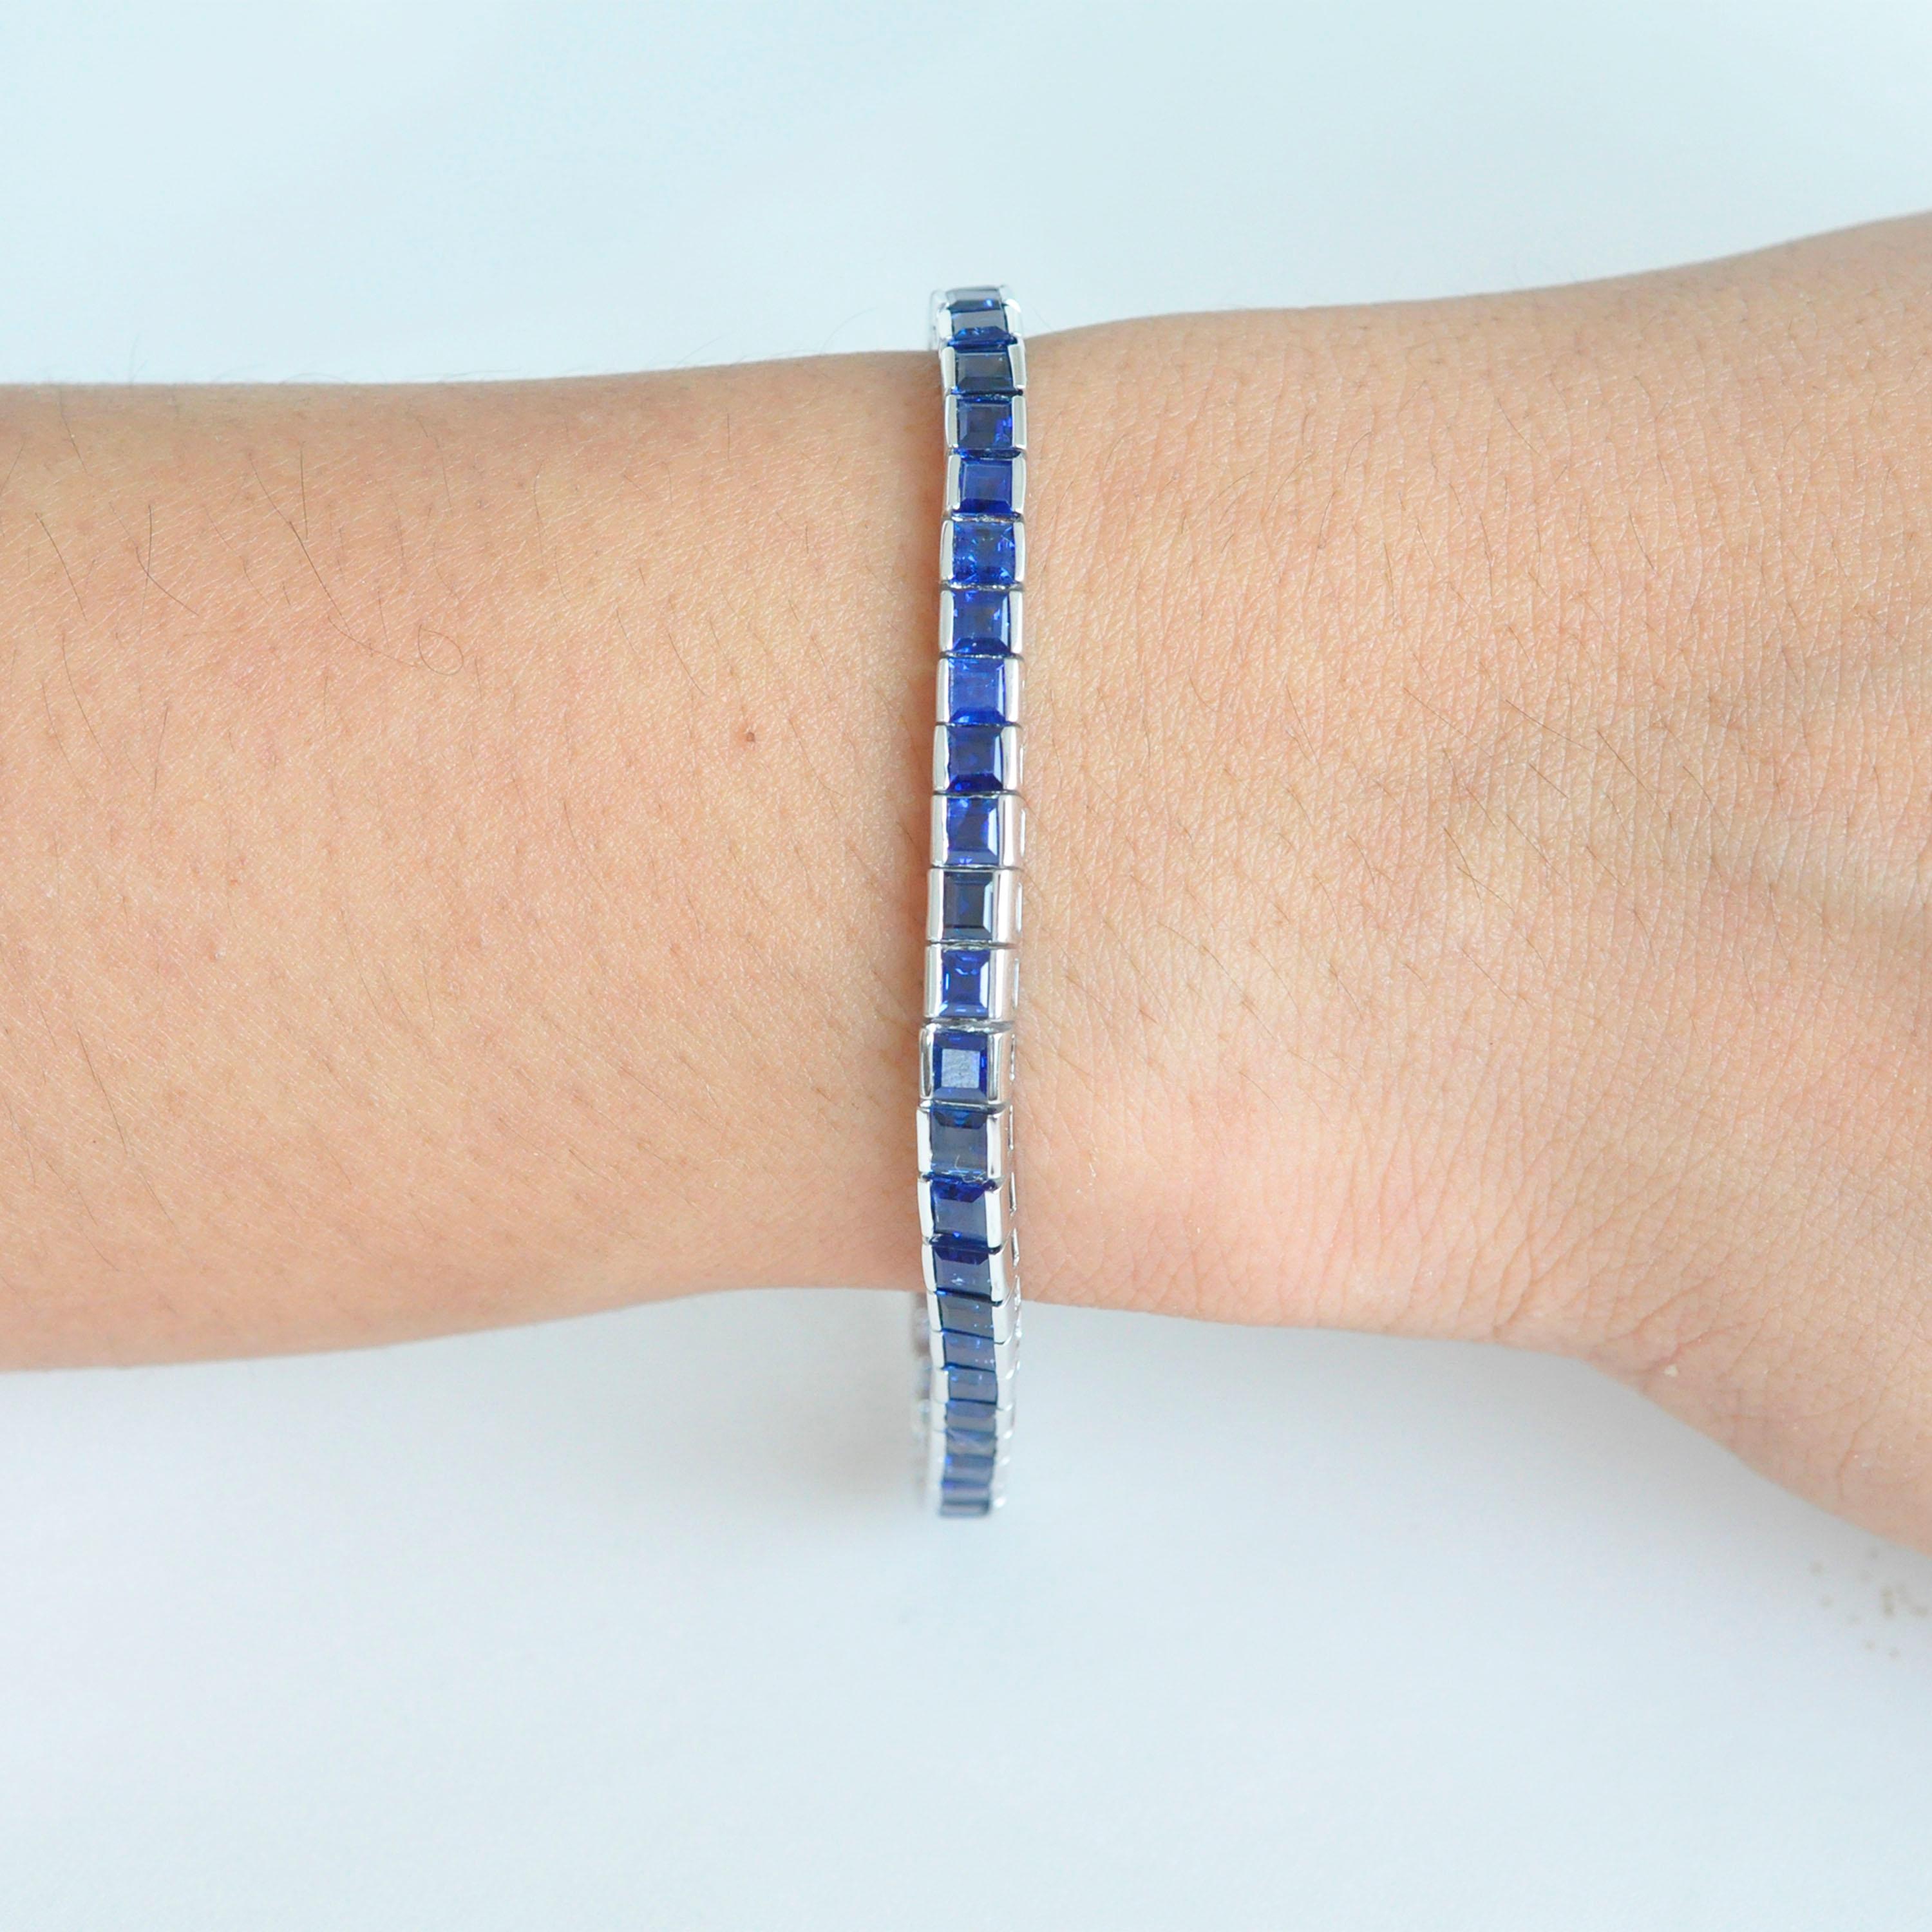 18 karat white gold 14.04 carat square natural blue sapphire tennis line bracelet.

This masterful royal blue sapphires tennis bracelet is superb. The identical 43 matching squares blue sapphires of size 4.5 mm in the center and graduating to 4 mm